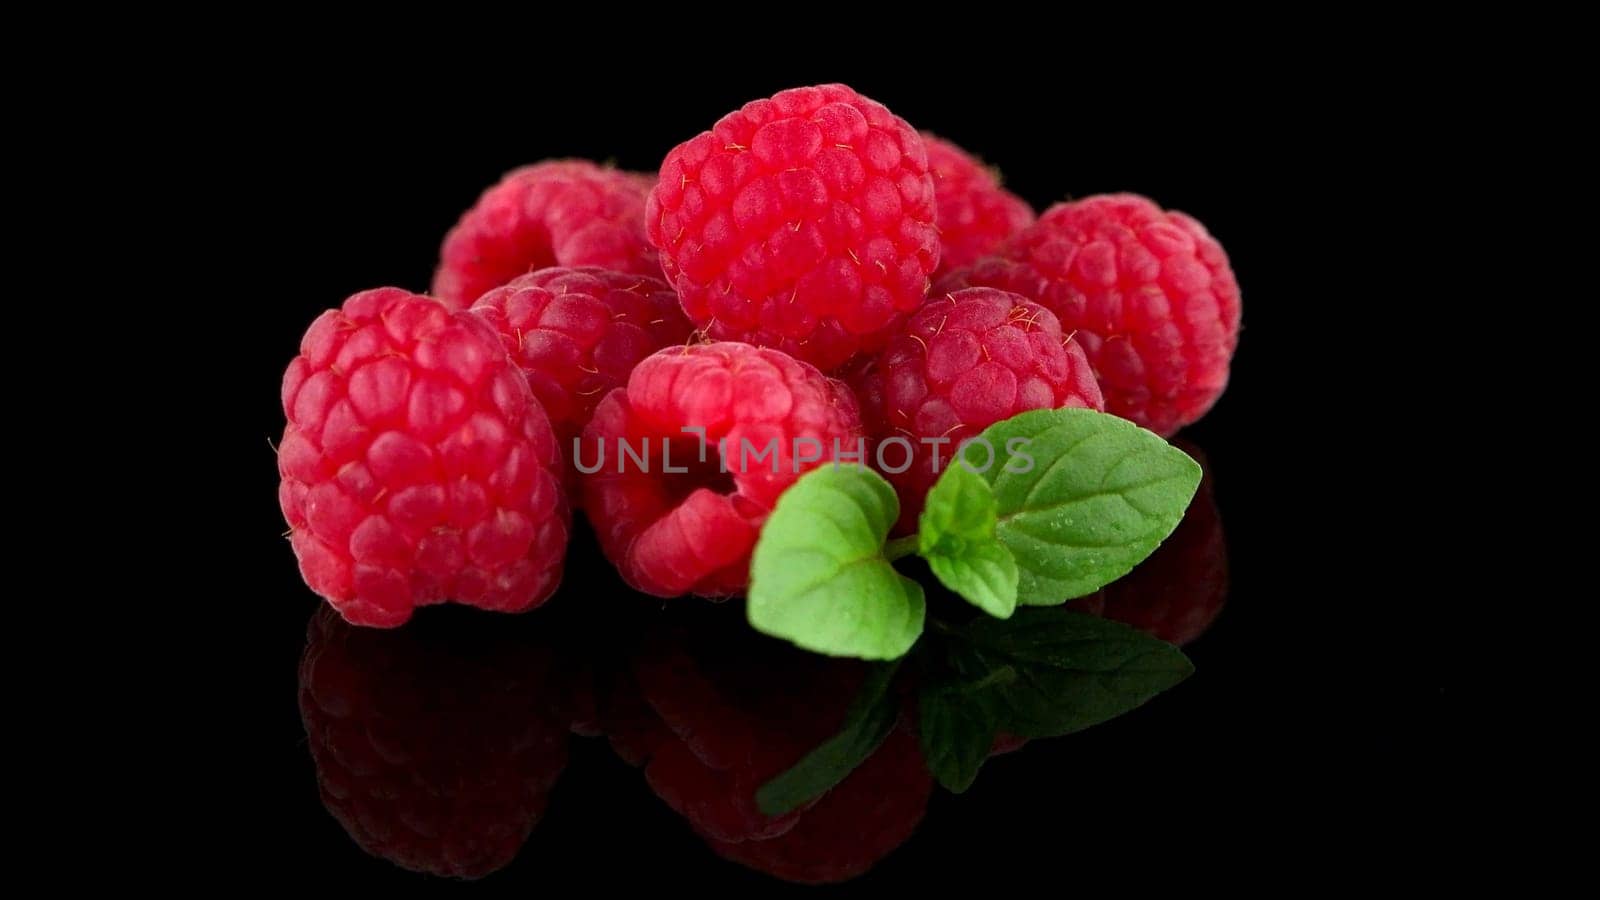 Raspberries with leaves isolated on black background